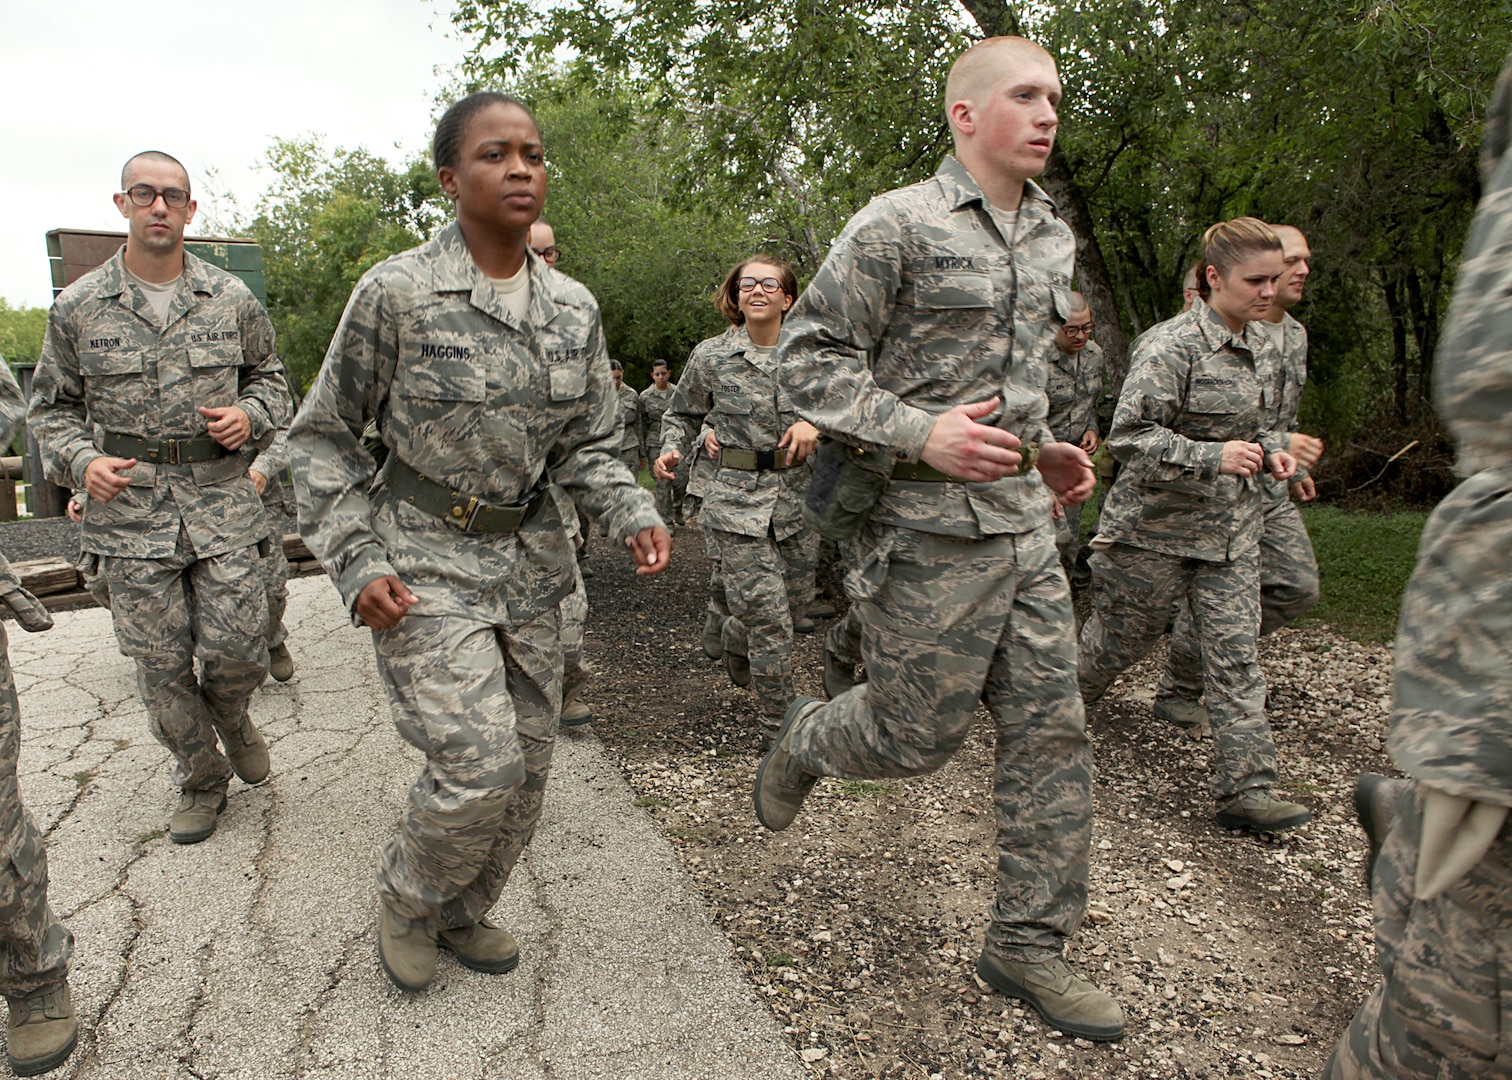 Air Force Basic Military Training trainees from the 320th Training Squadron move to the next obstacle while running the obstacle course June 30. The 737th Training Group trains approximately 35,000 Airmen each year. More than seven million Airmen have completed BMT since 1946. (U.S. Air Force photo/Robbin Cresswell) 